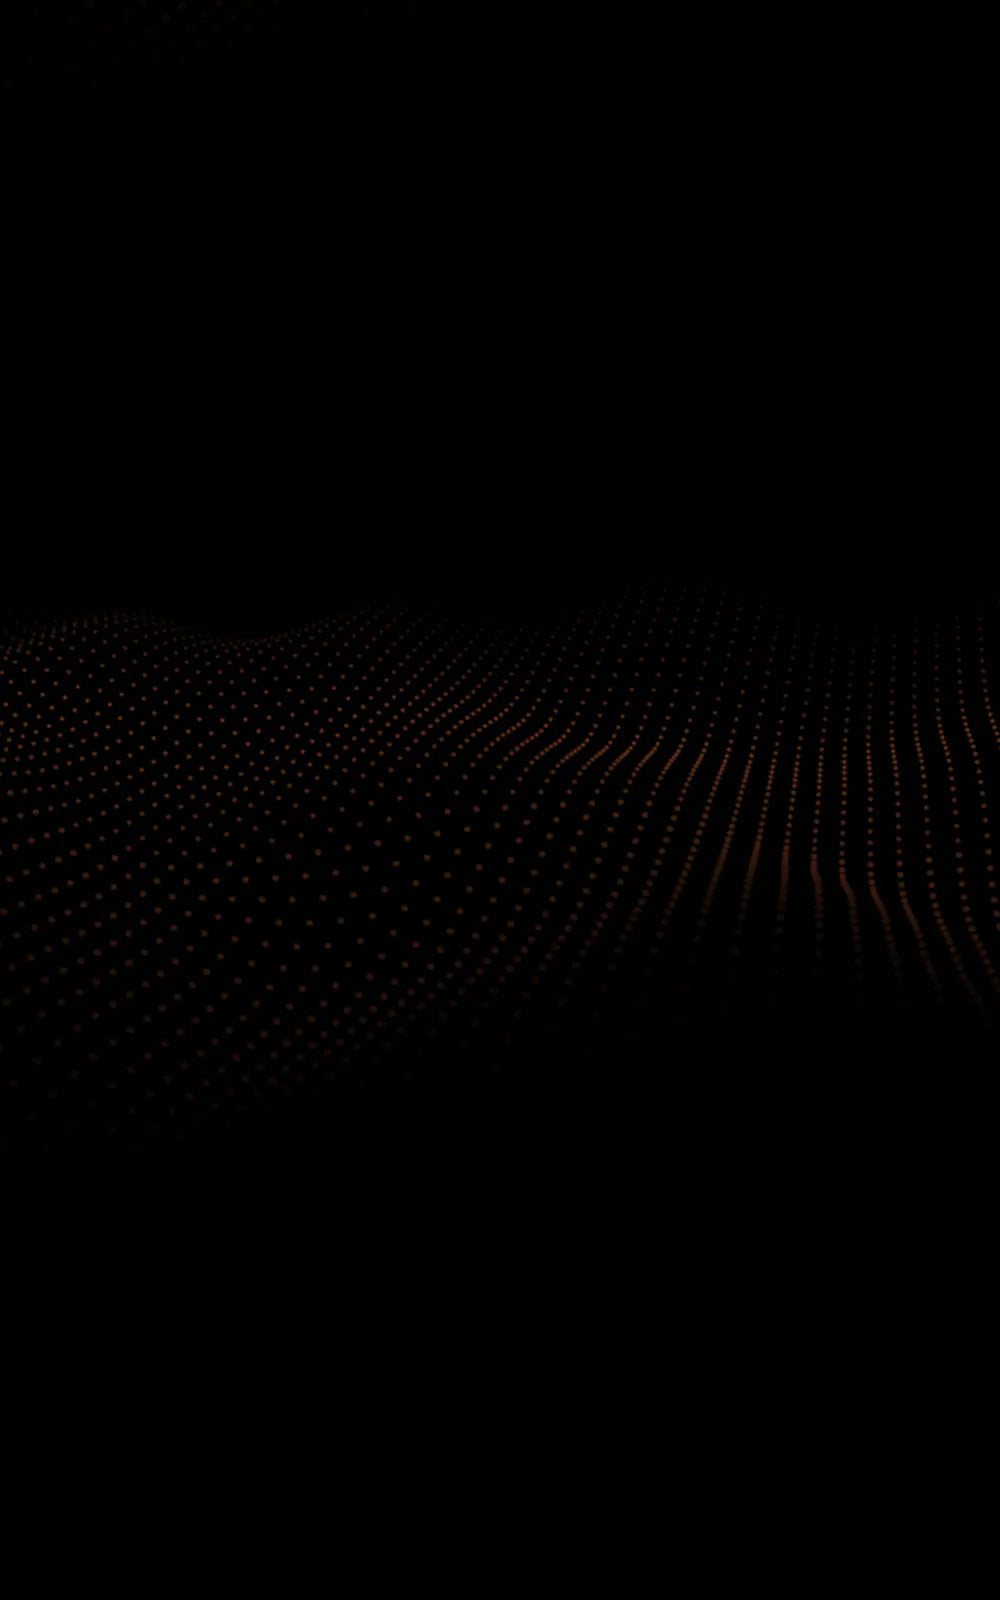 Graphic Waves on Black Background